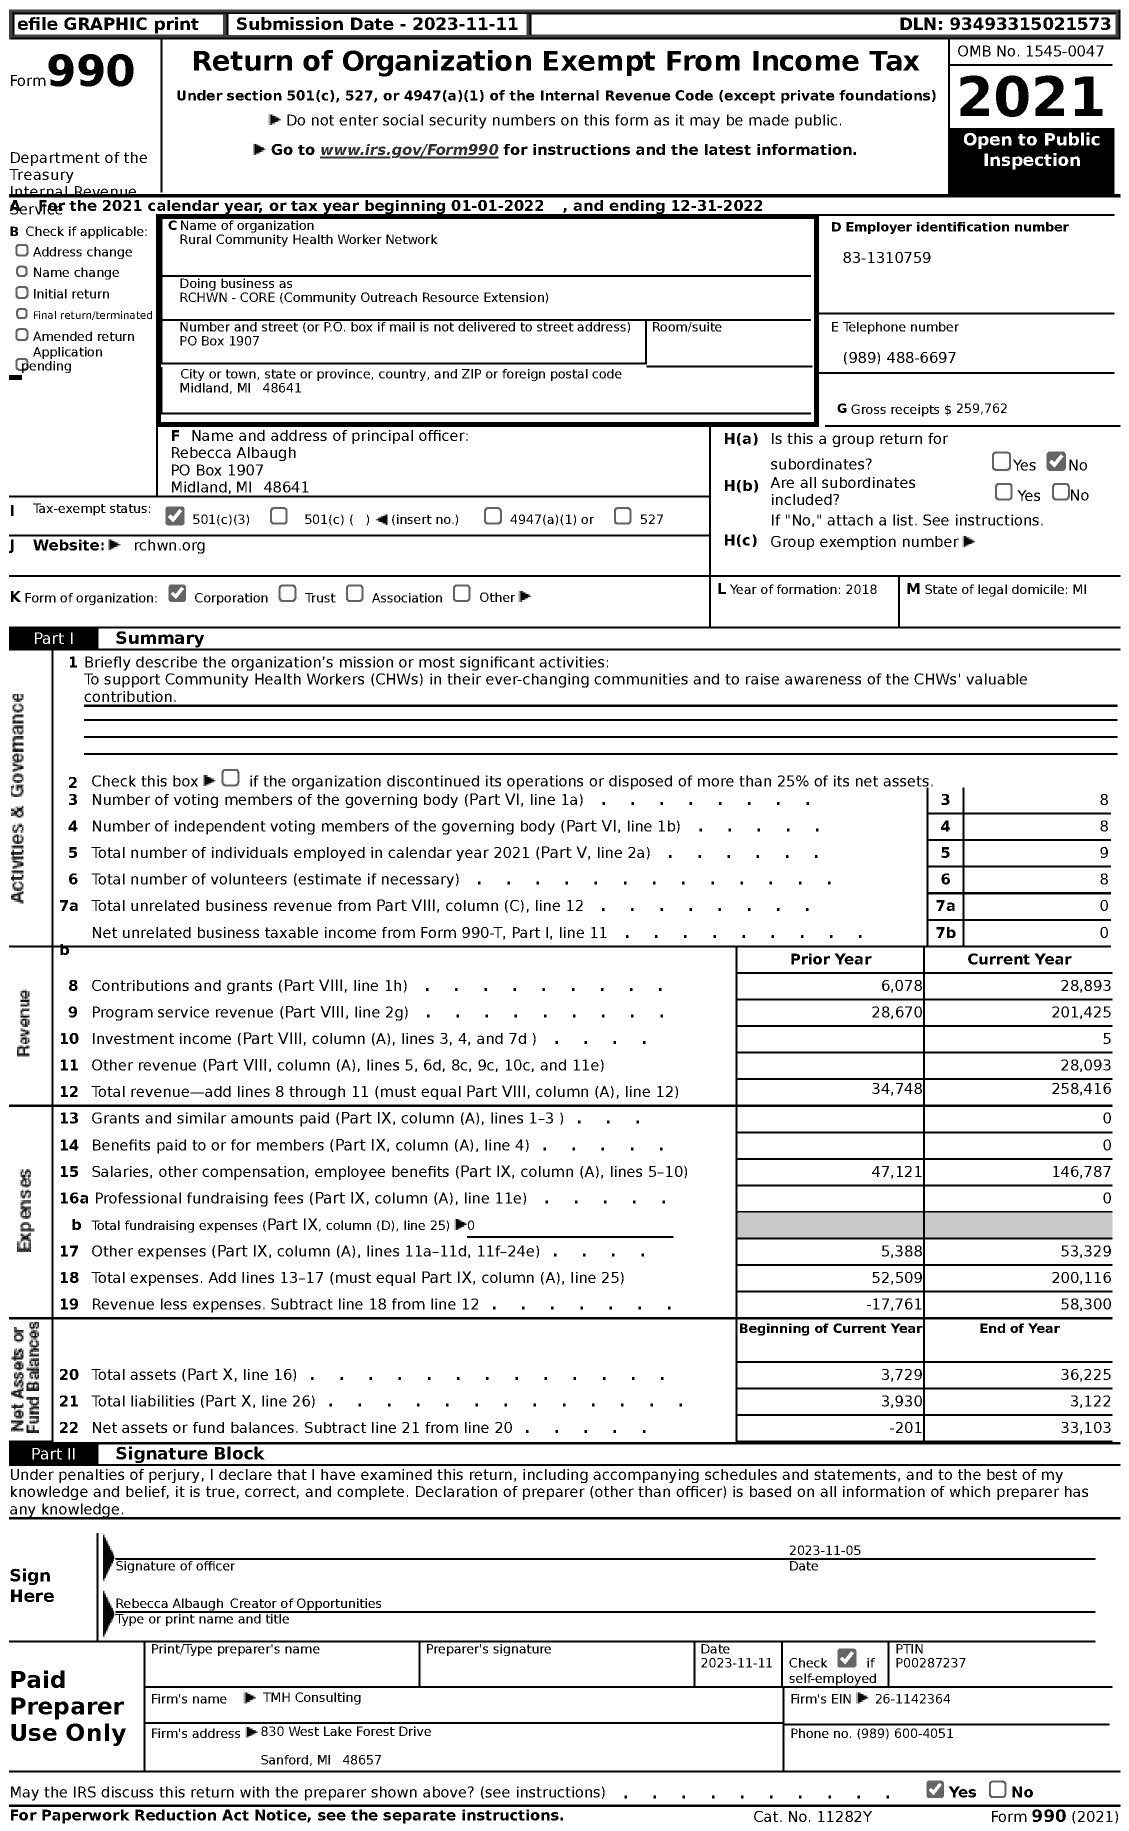 Image of first page of 2022 Form 990 for RCHWN - Core